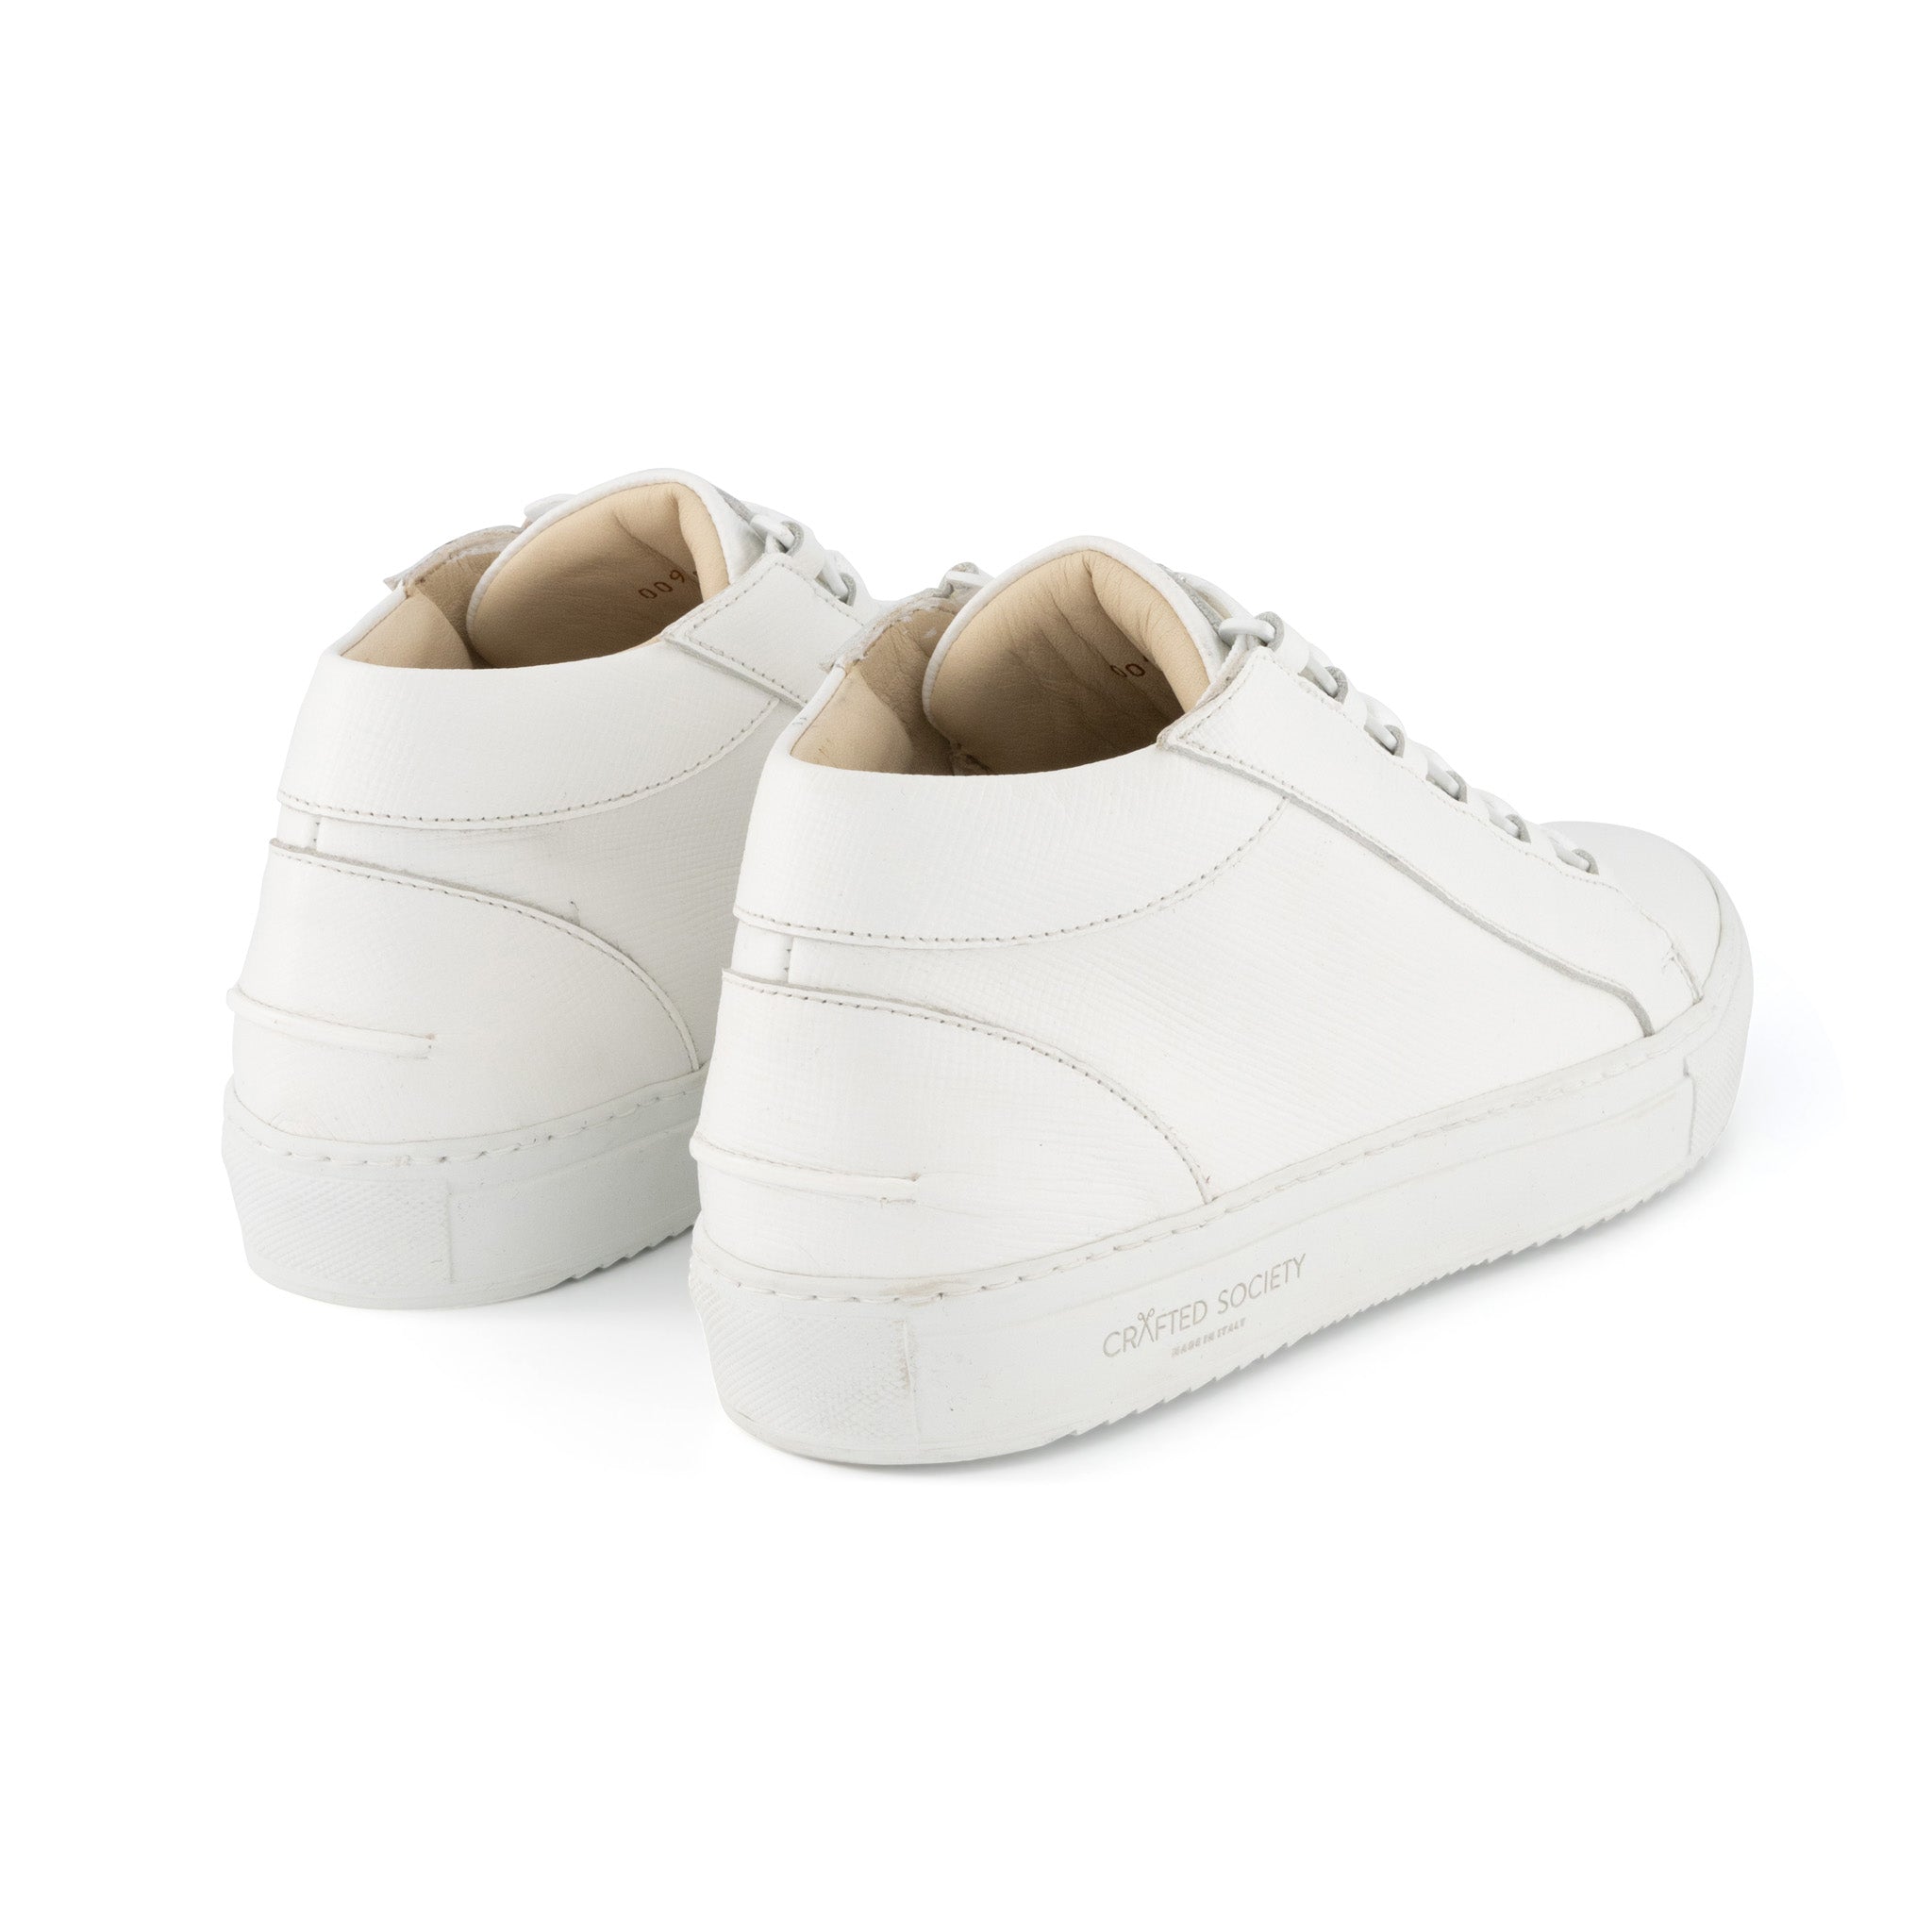 Rico Mid Sneaker - White Saffiano Leather / White Outsole | MADE IN ITALY